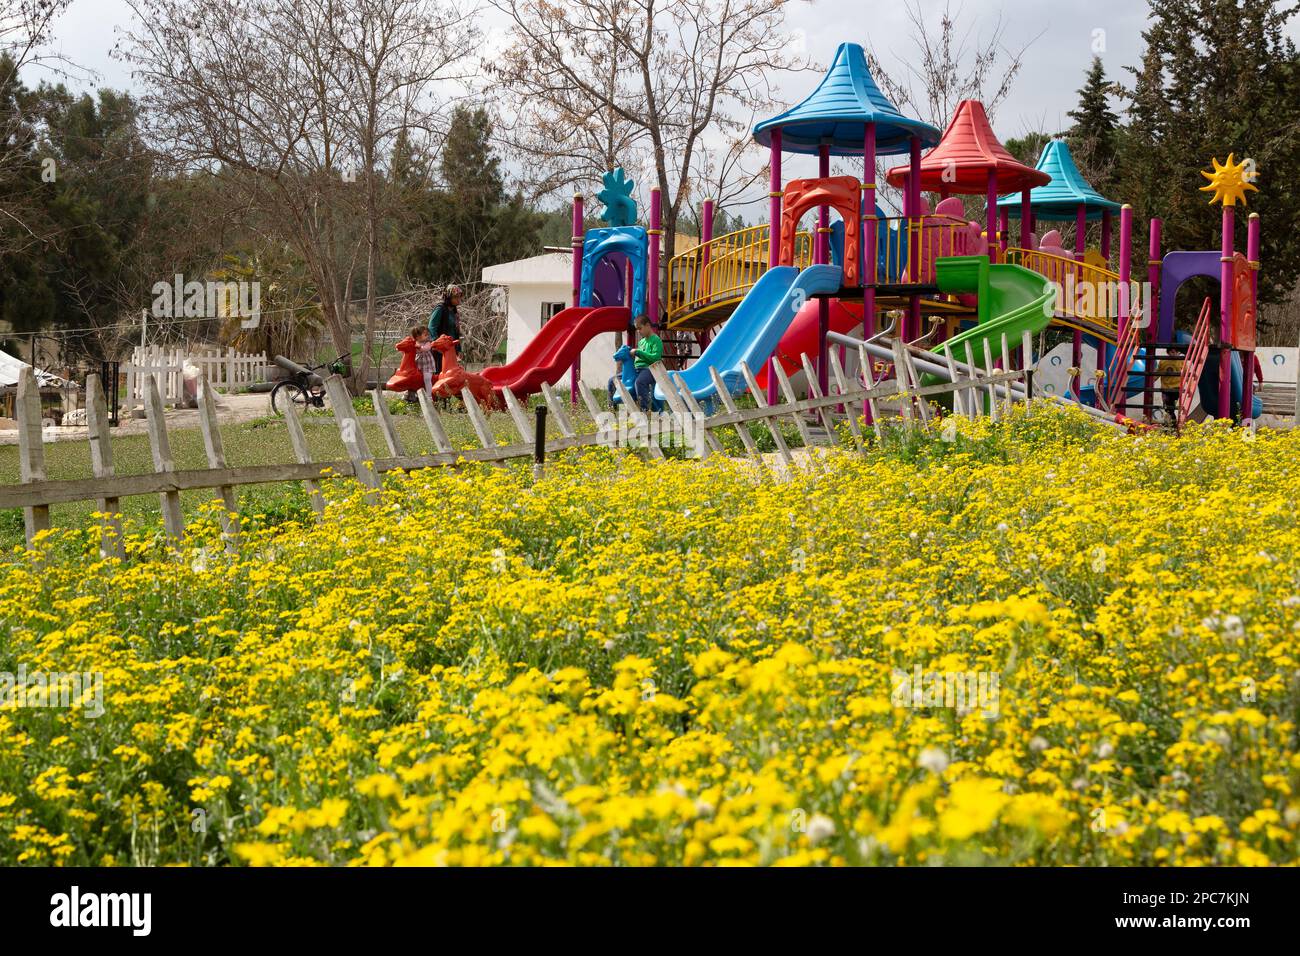 Plastic playground with play stations in the regenerated nature. With the arrival of spring, both nature and children's parks became lively concept. Stock Photo